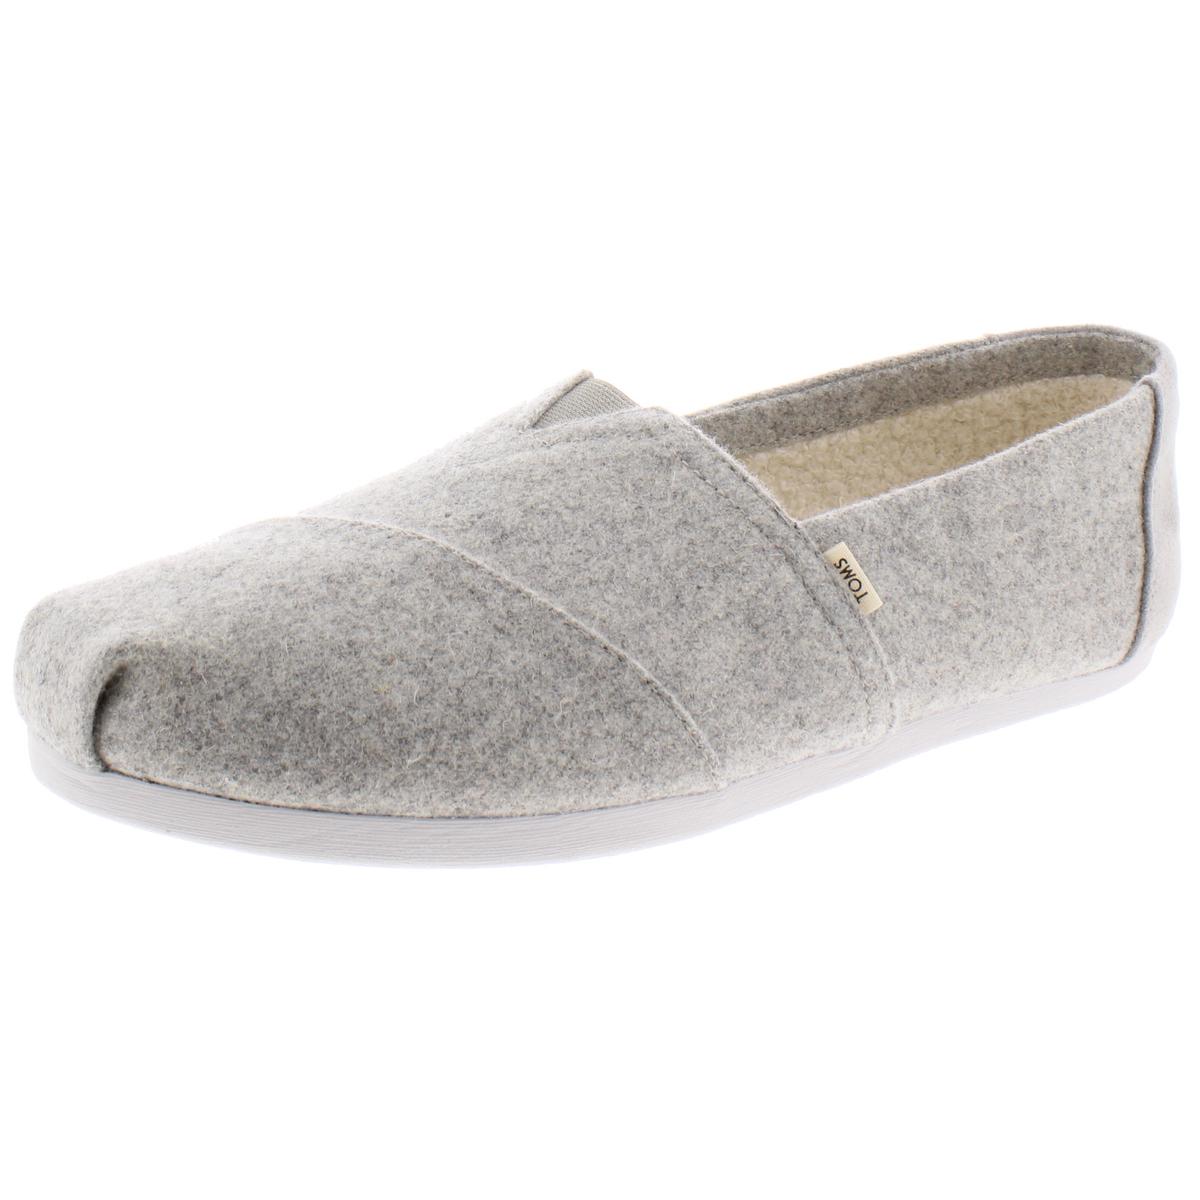 TOMS Classic Shearling Womens Felt Faux Shearling Lined Casual Shoes